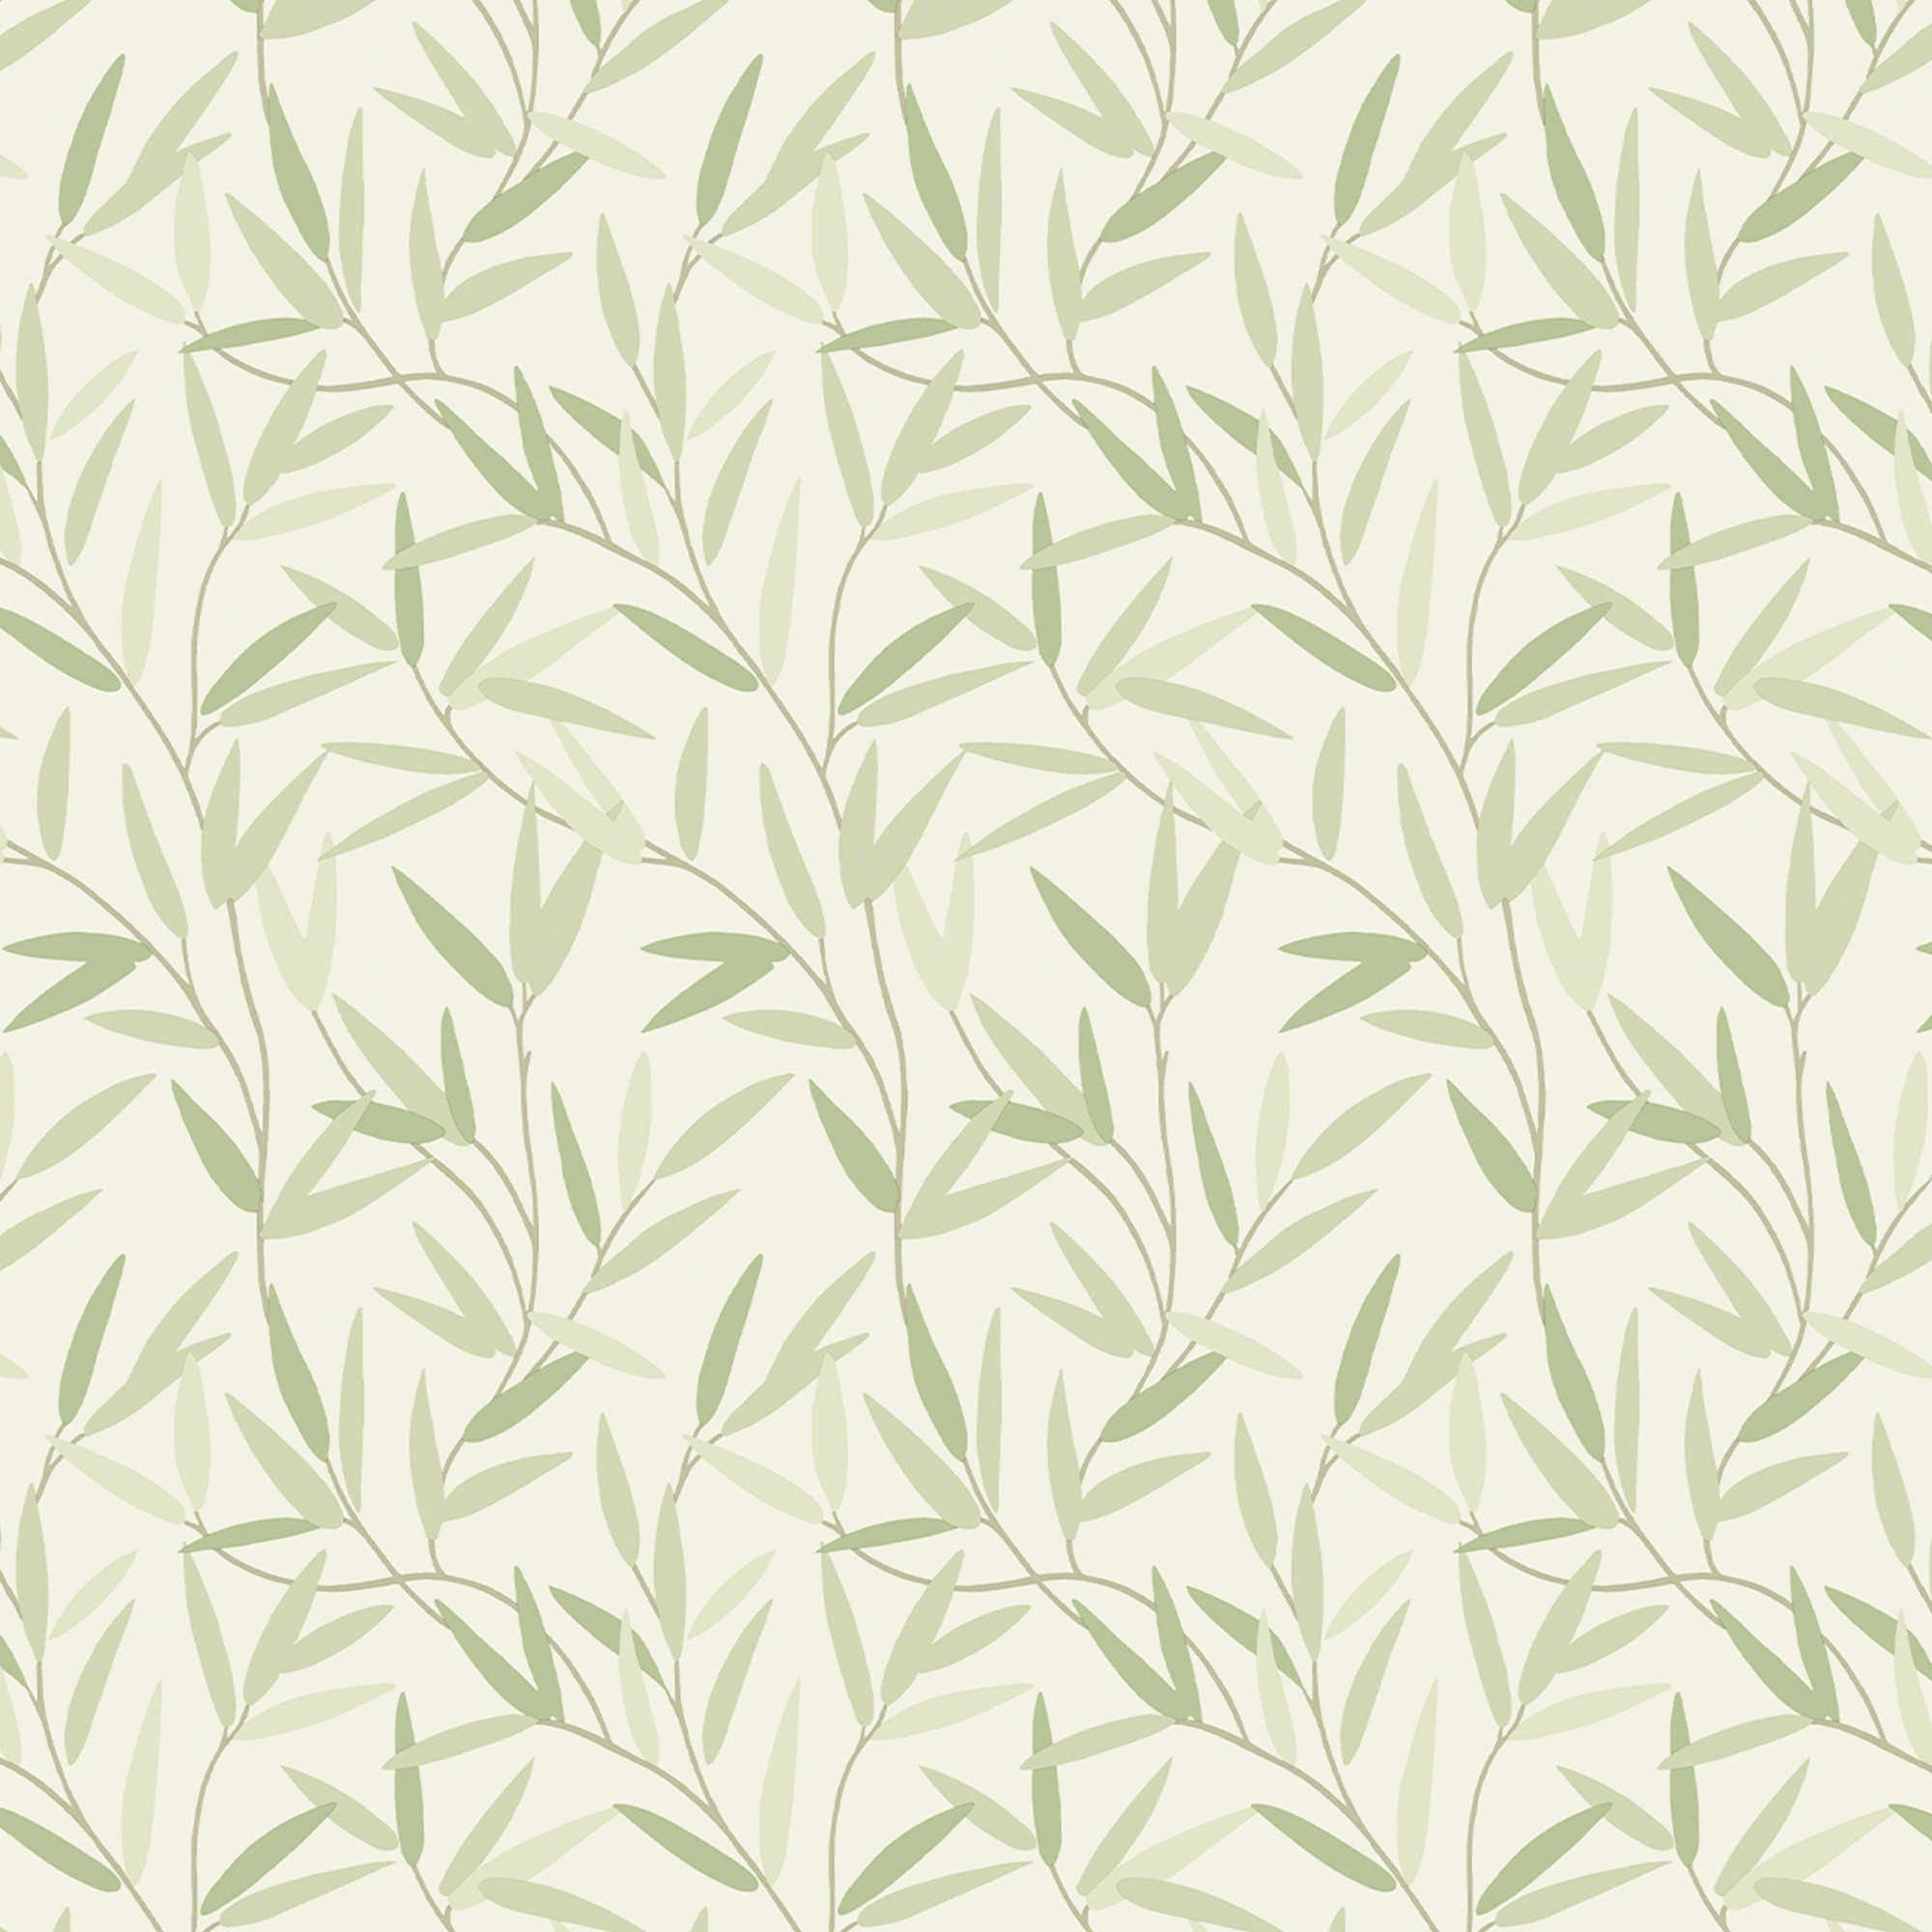 Laura Ashley 113364 Willow Leaf Hedgerow Wallpaper